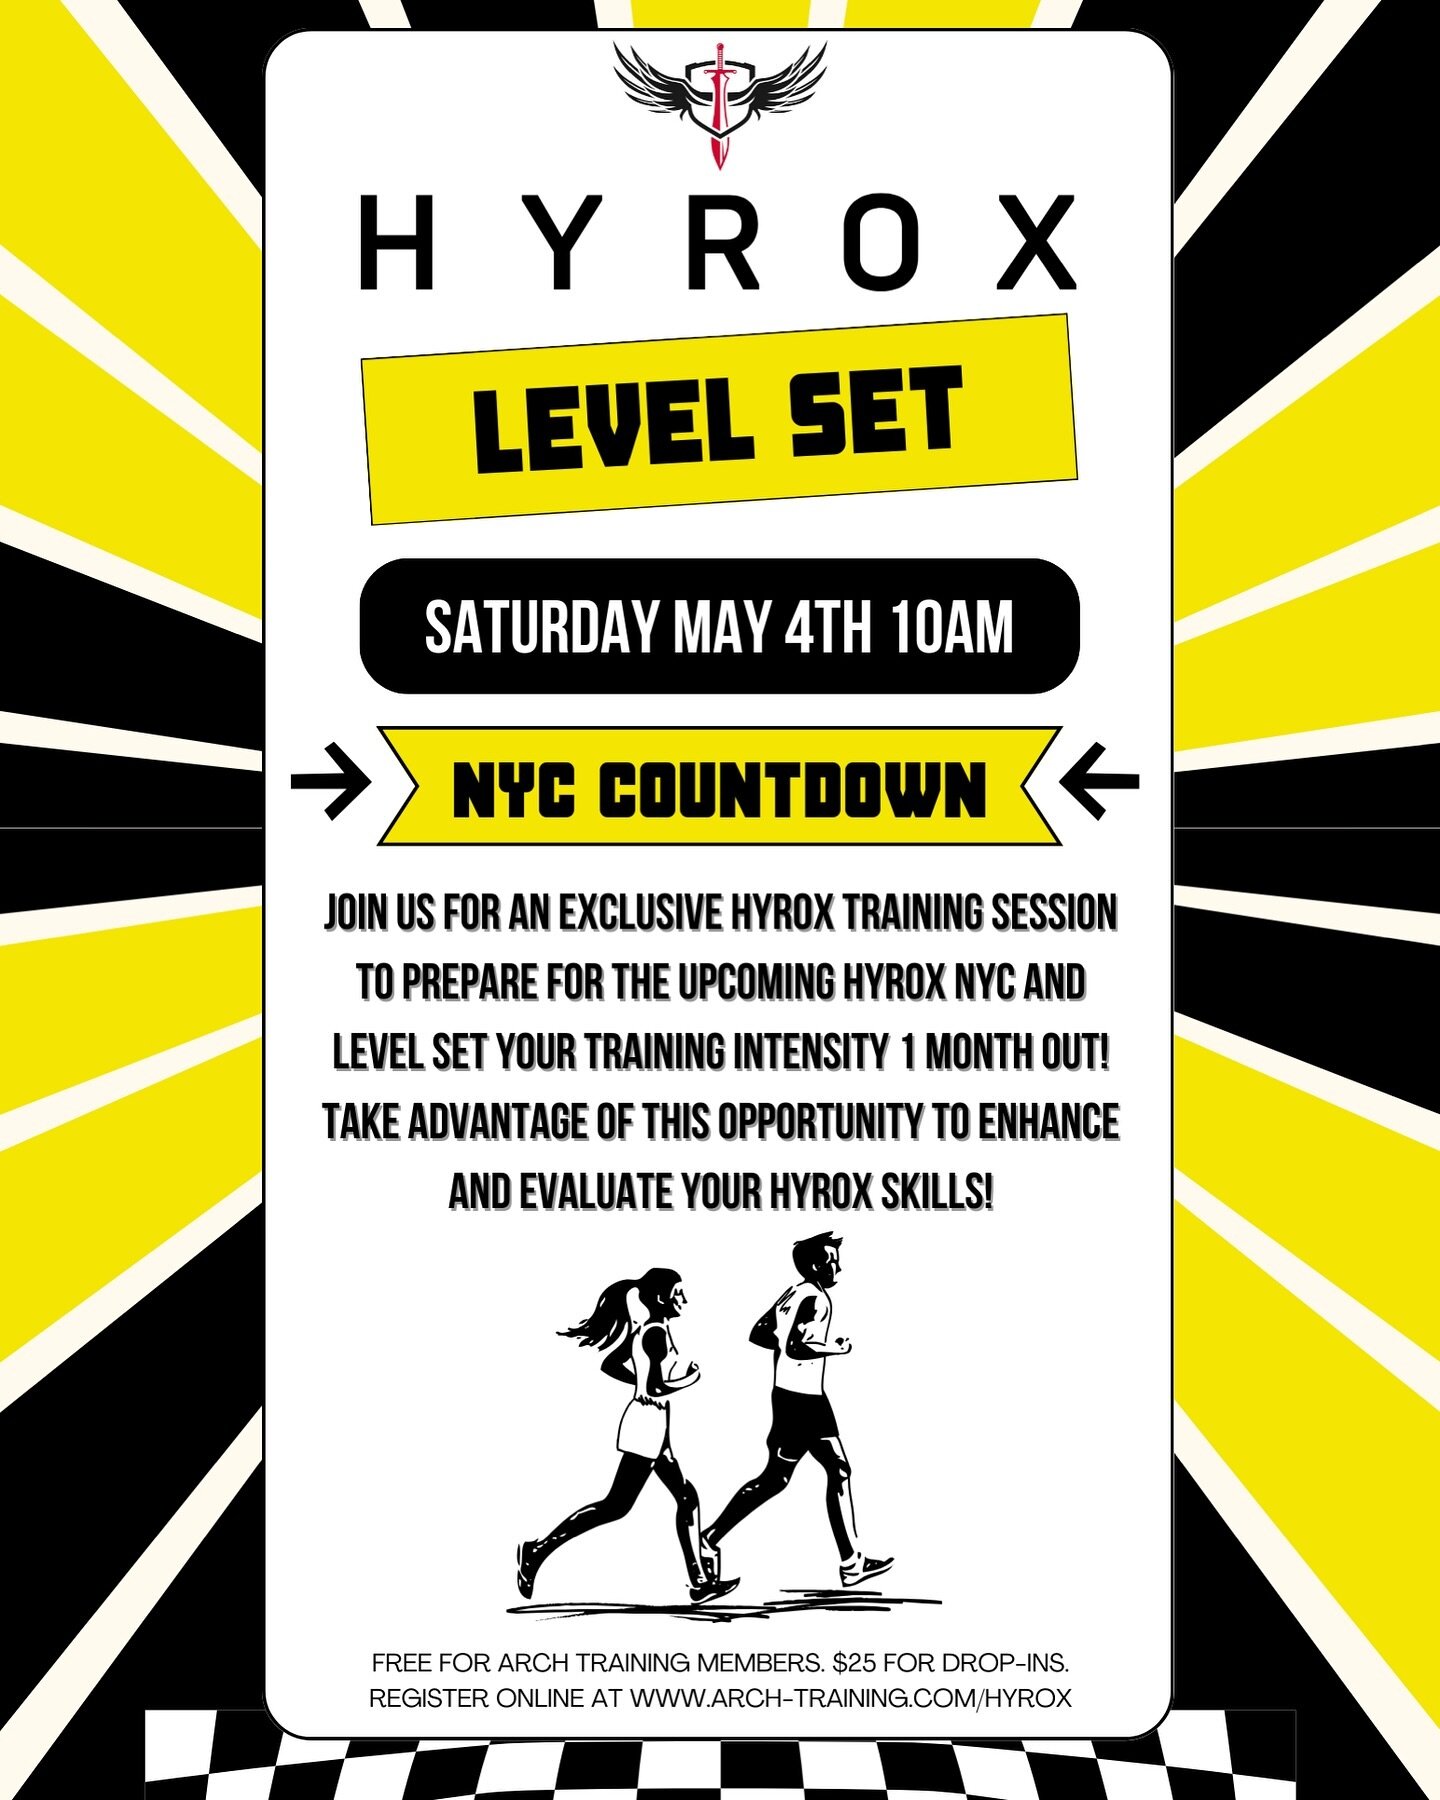 ⁉️Are you training for HYROX NYC⁉️
🏃&zwj;♀️💨Join us for a HYROX Level Set on Saturday May 4th at 10AM for an exclusive training session to help YOU prepare for the upcoming HYROX NYC and Level Set your training intensity with 1 month out! 

🏁This 